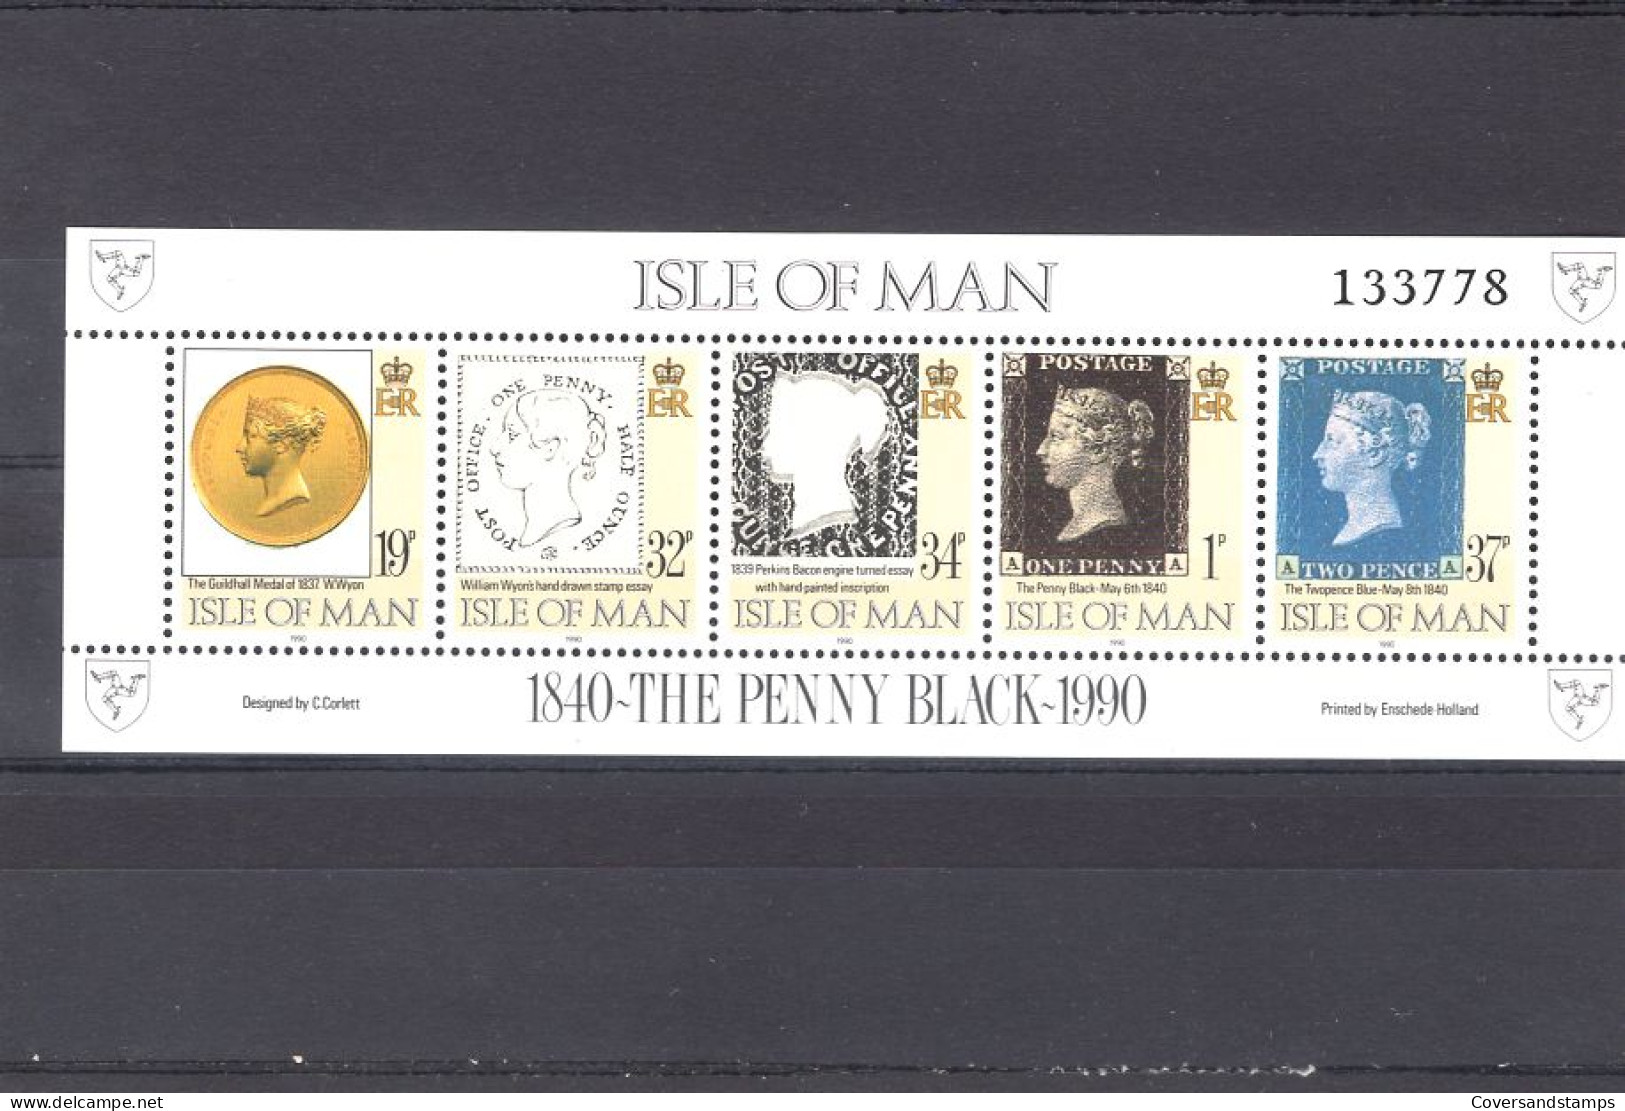  Isle Of Man : 150th Anniversary Of The Penny Black Sheetlet, MNH ** - Isle Of Man